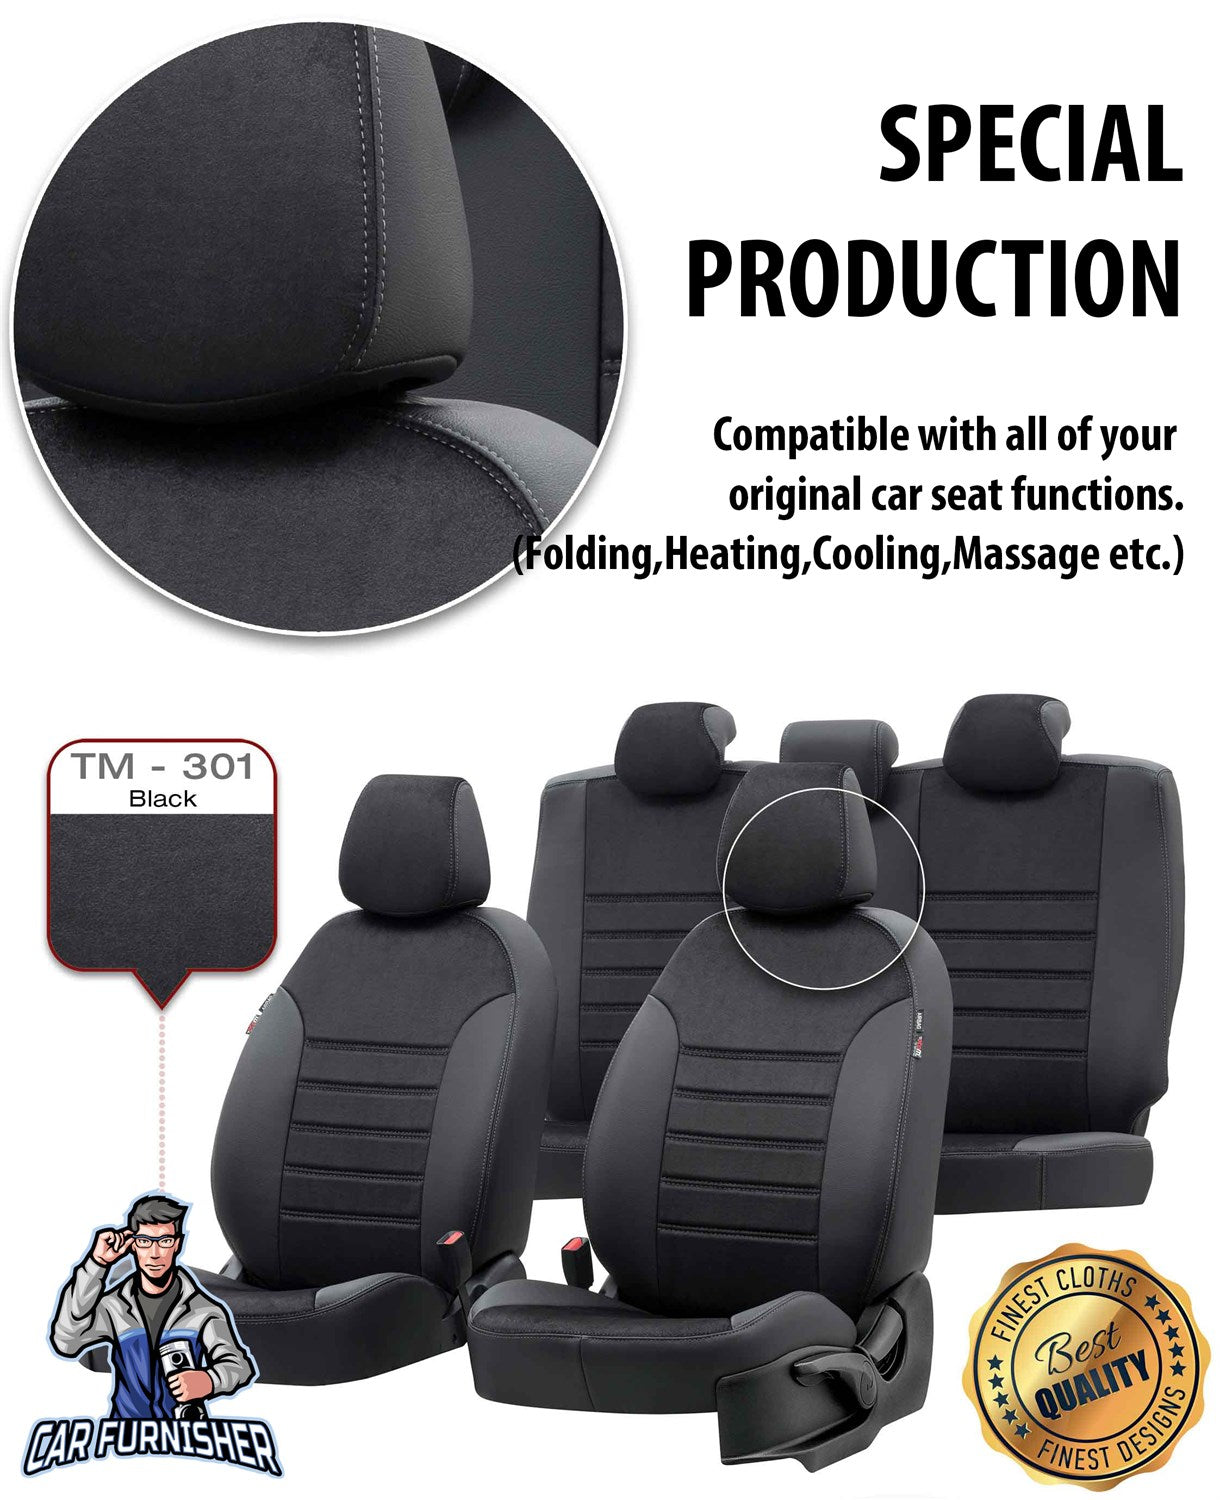 Opel Frontera Seat Cover Milano Suede Design Smoked Black Leather & Suede Fabric